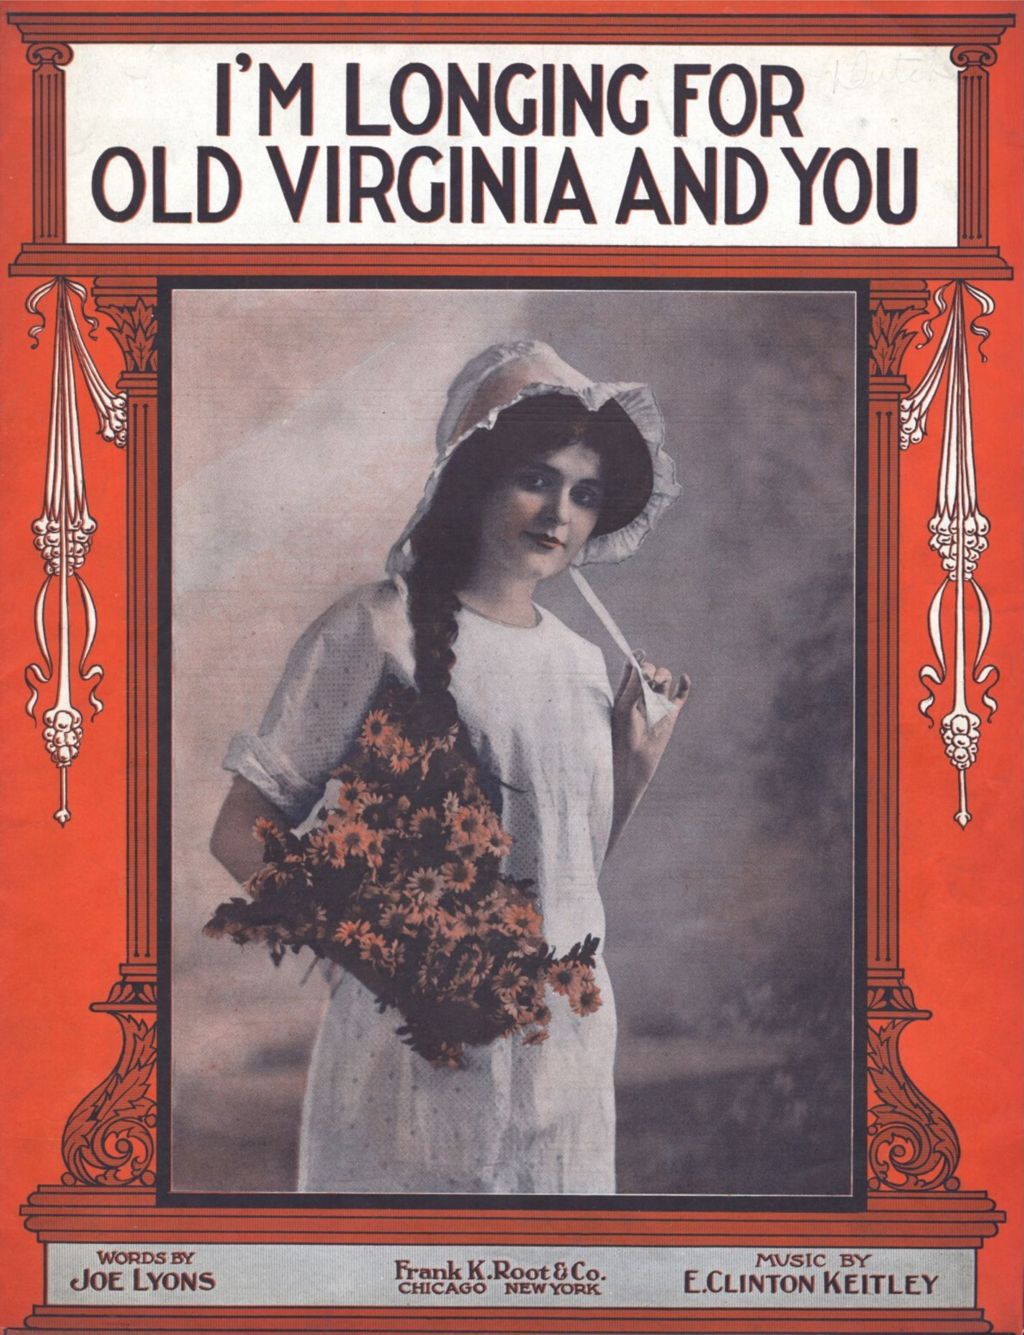 I'm Longing for Old Virginia and You